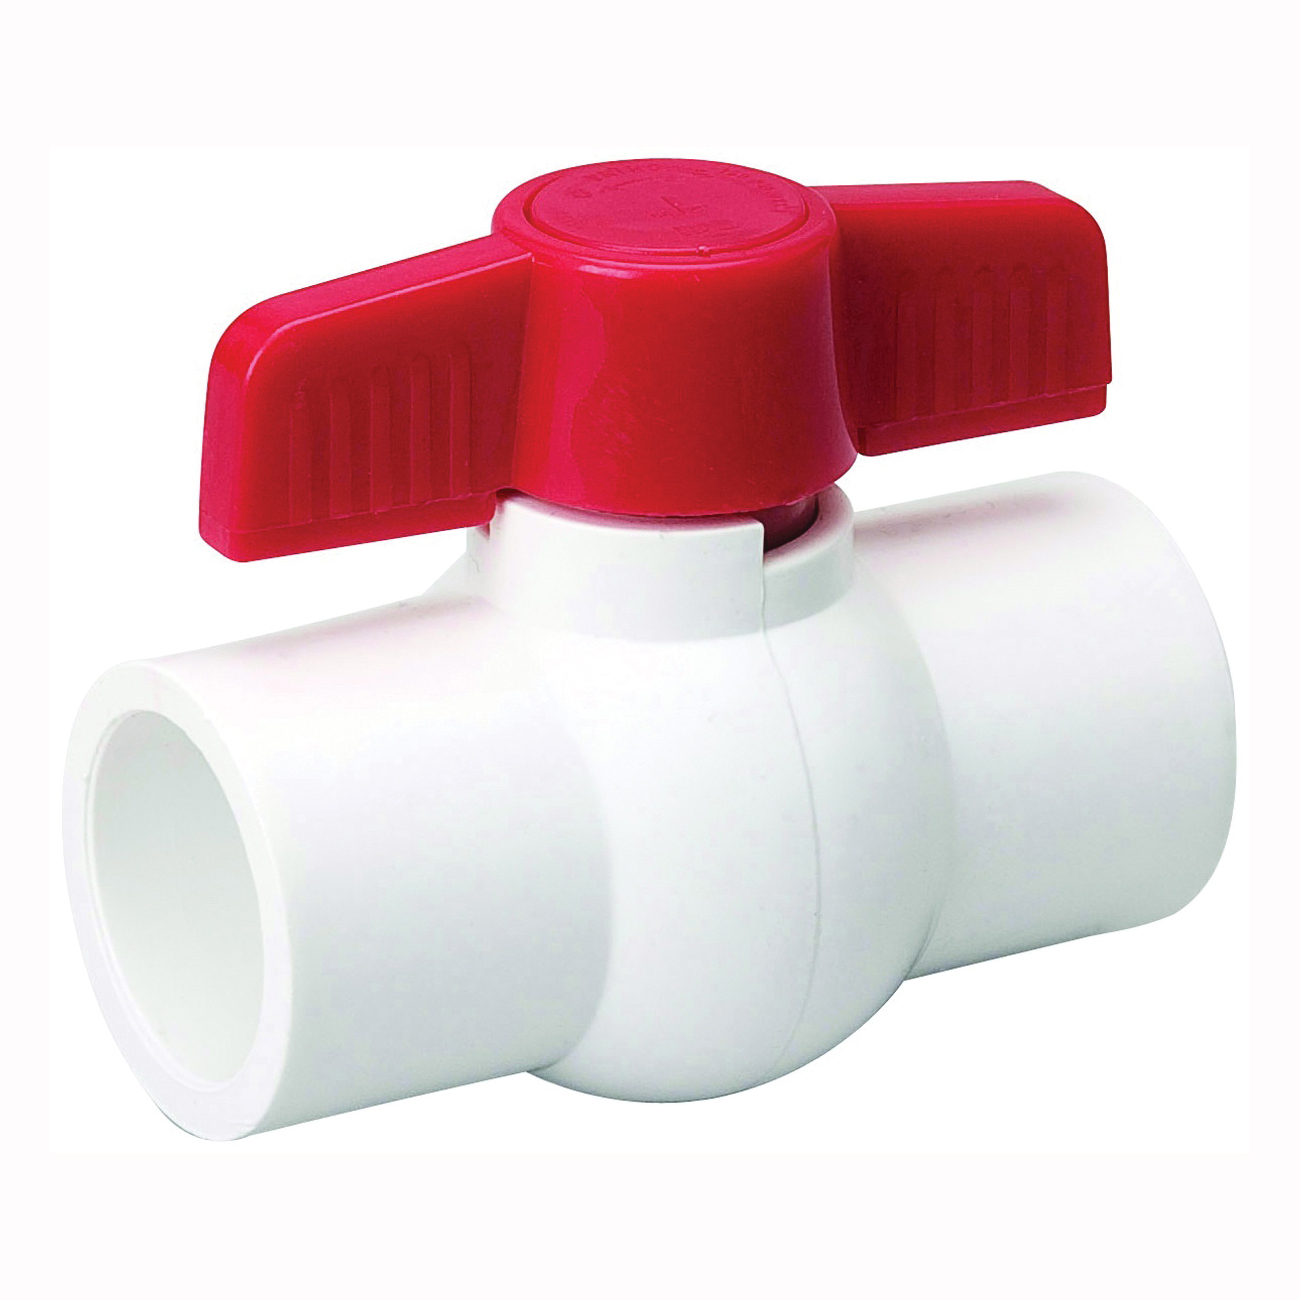 107-637HC Ball Valve, 1-1/2 in Connection, Compression, 150 psi Pressure, Manual Actuator, PVC Body